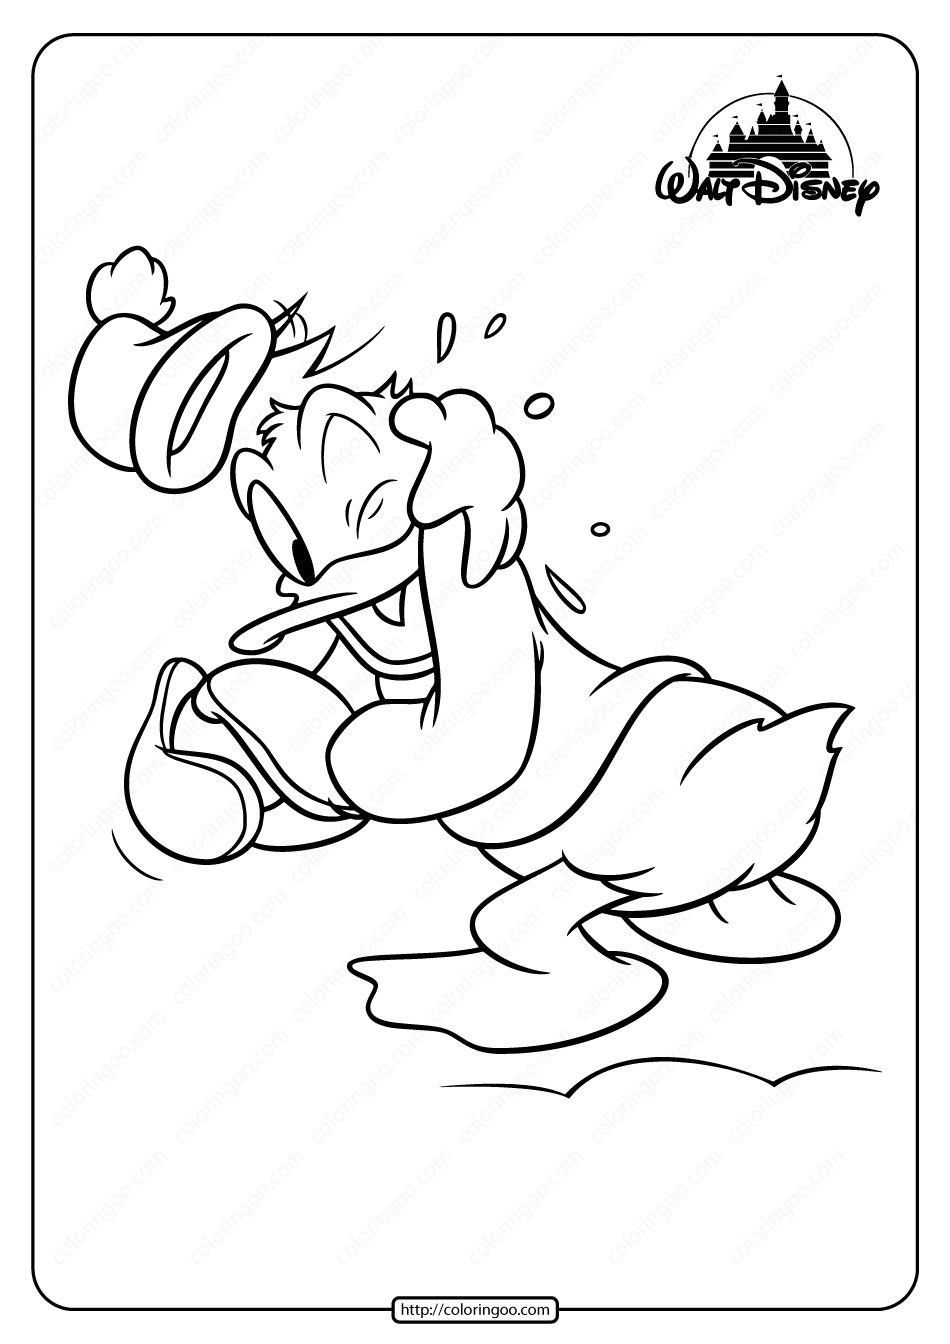 Printable Donald Duck Playing Snowball Coloring Page